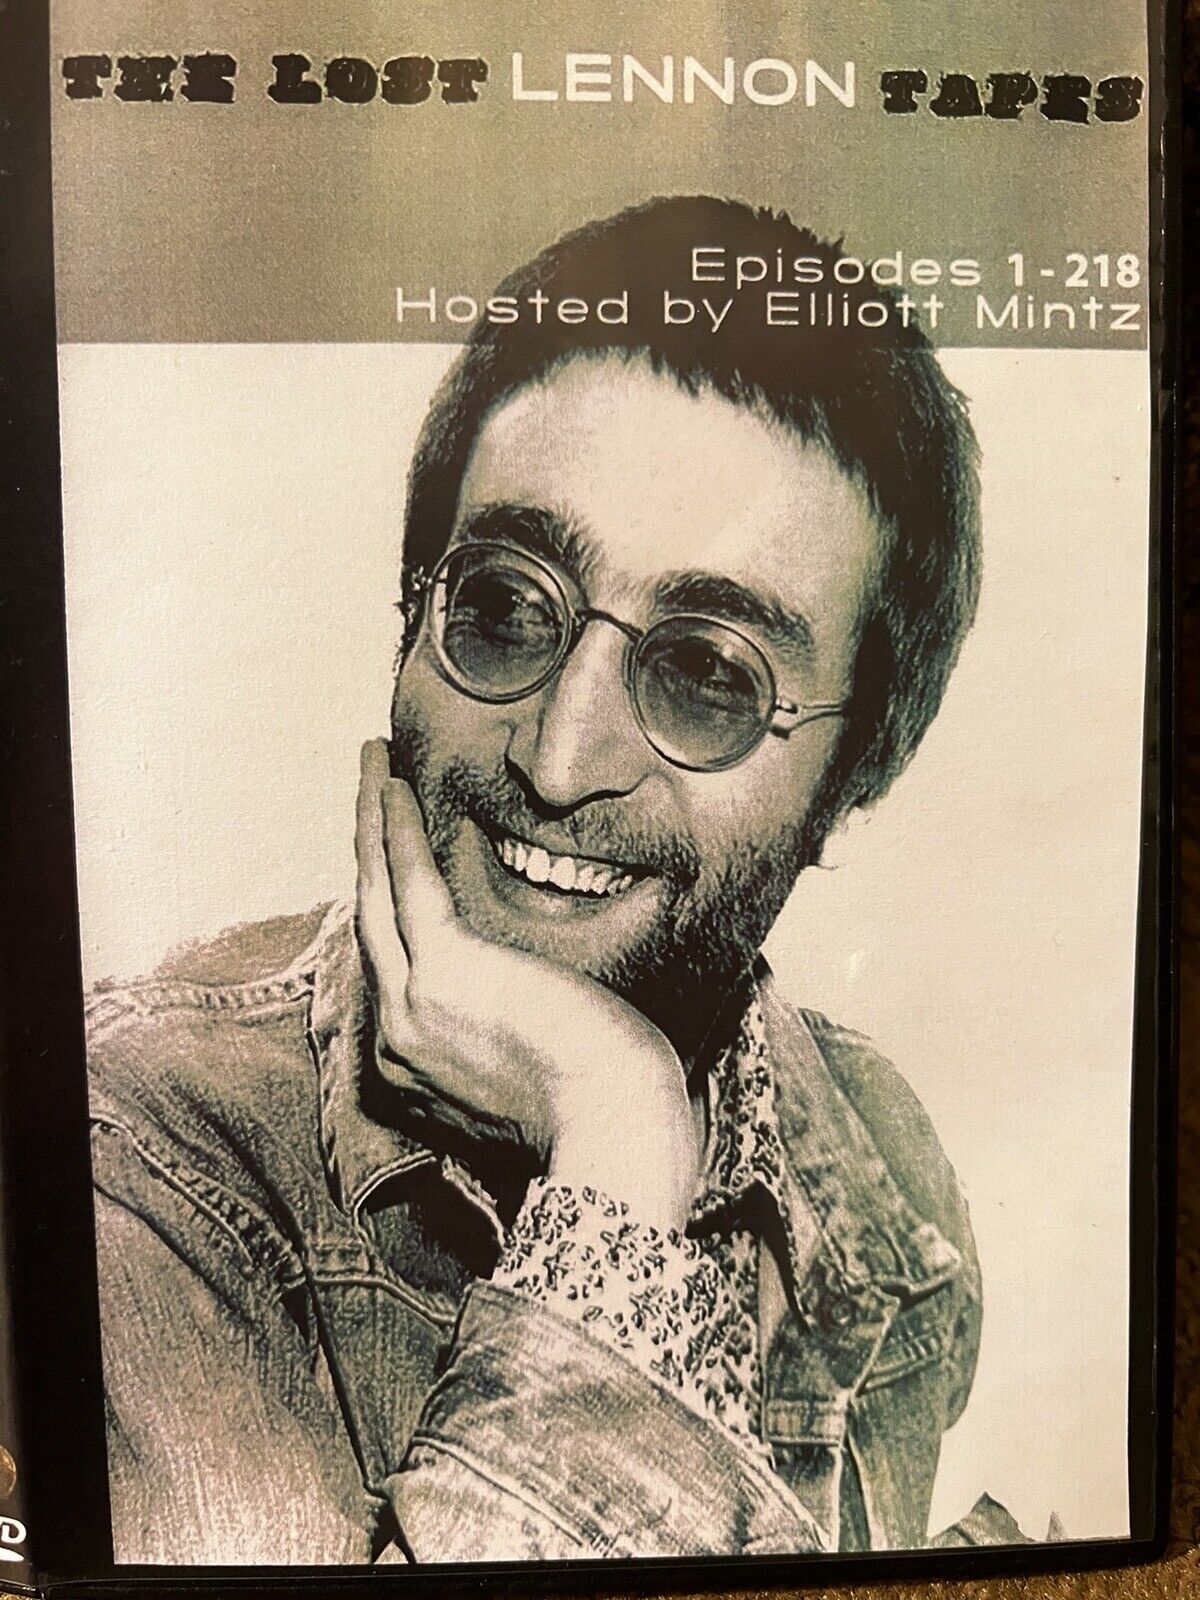 The Lost Lennon Tapes - COMPLETE - John Lennon - Radio Broadcasts 